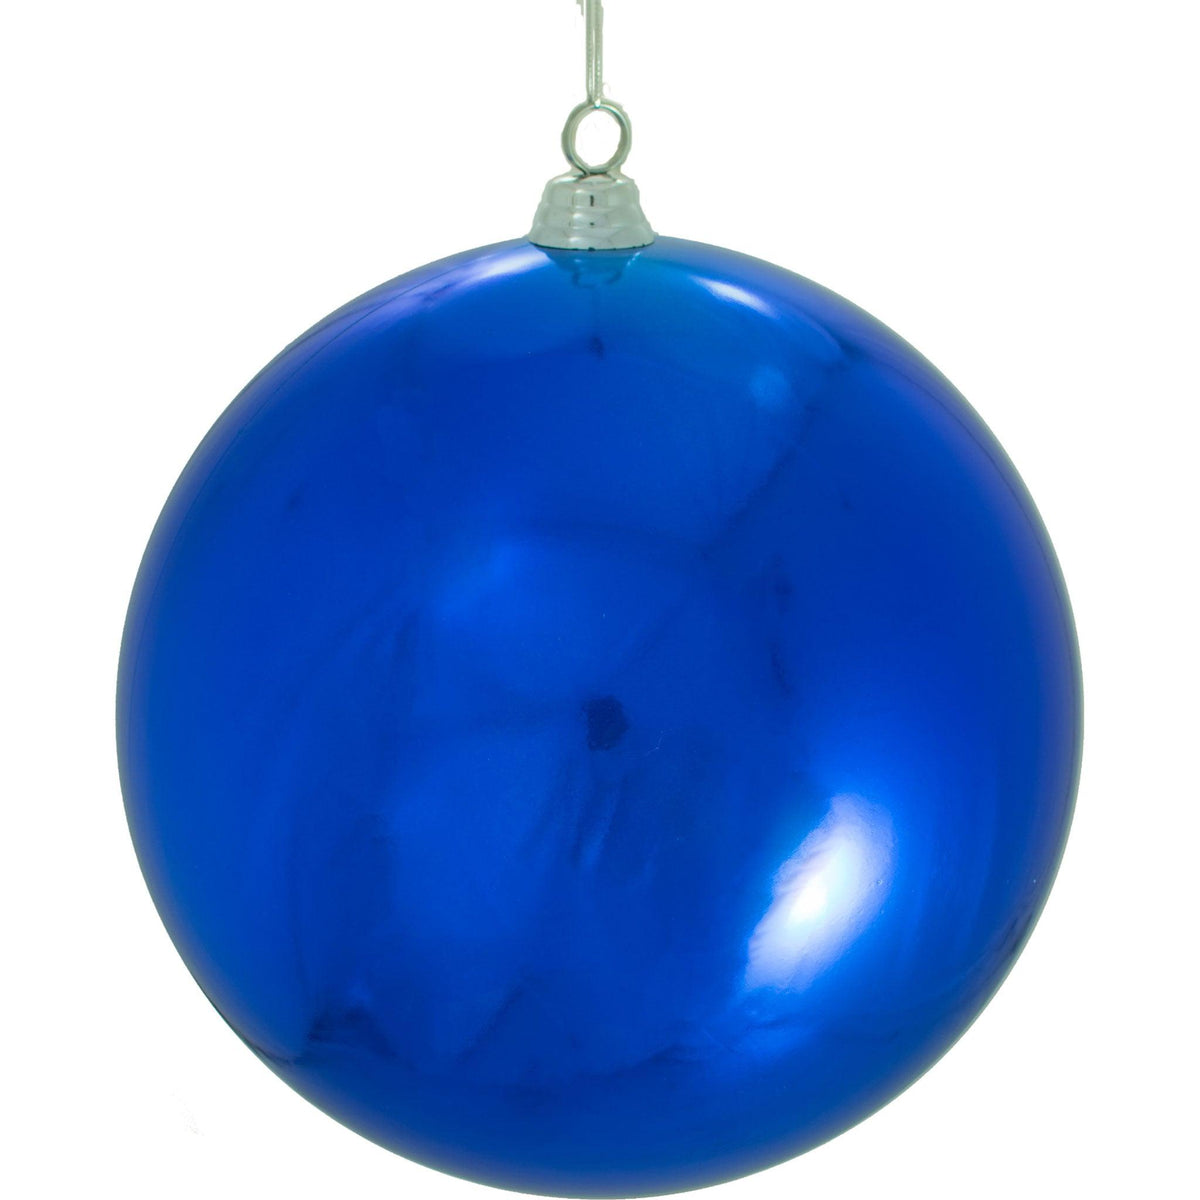 Buy brand new Shiny Blue Plastic Ball Ornaments from Leedisplay.com in large sizes.